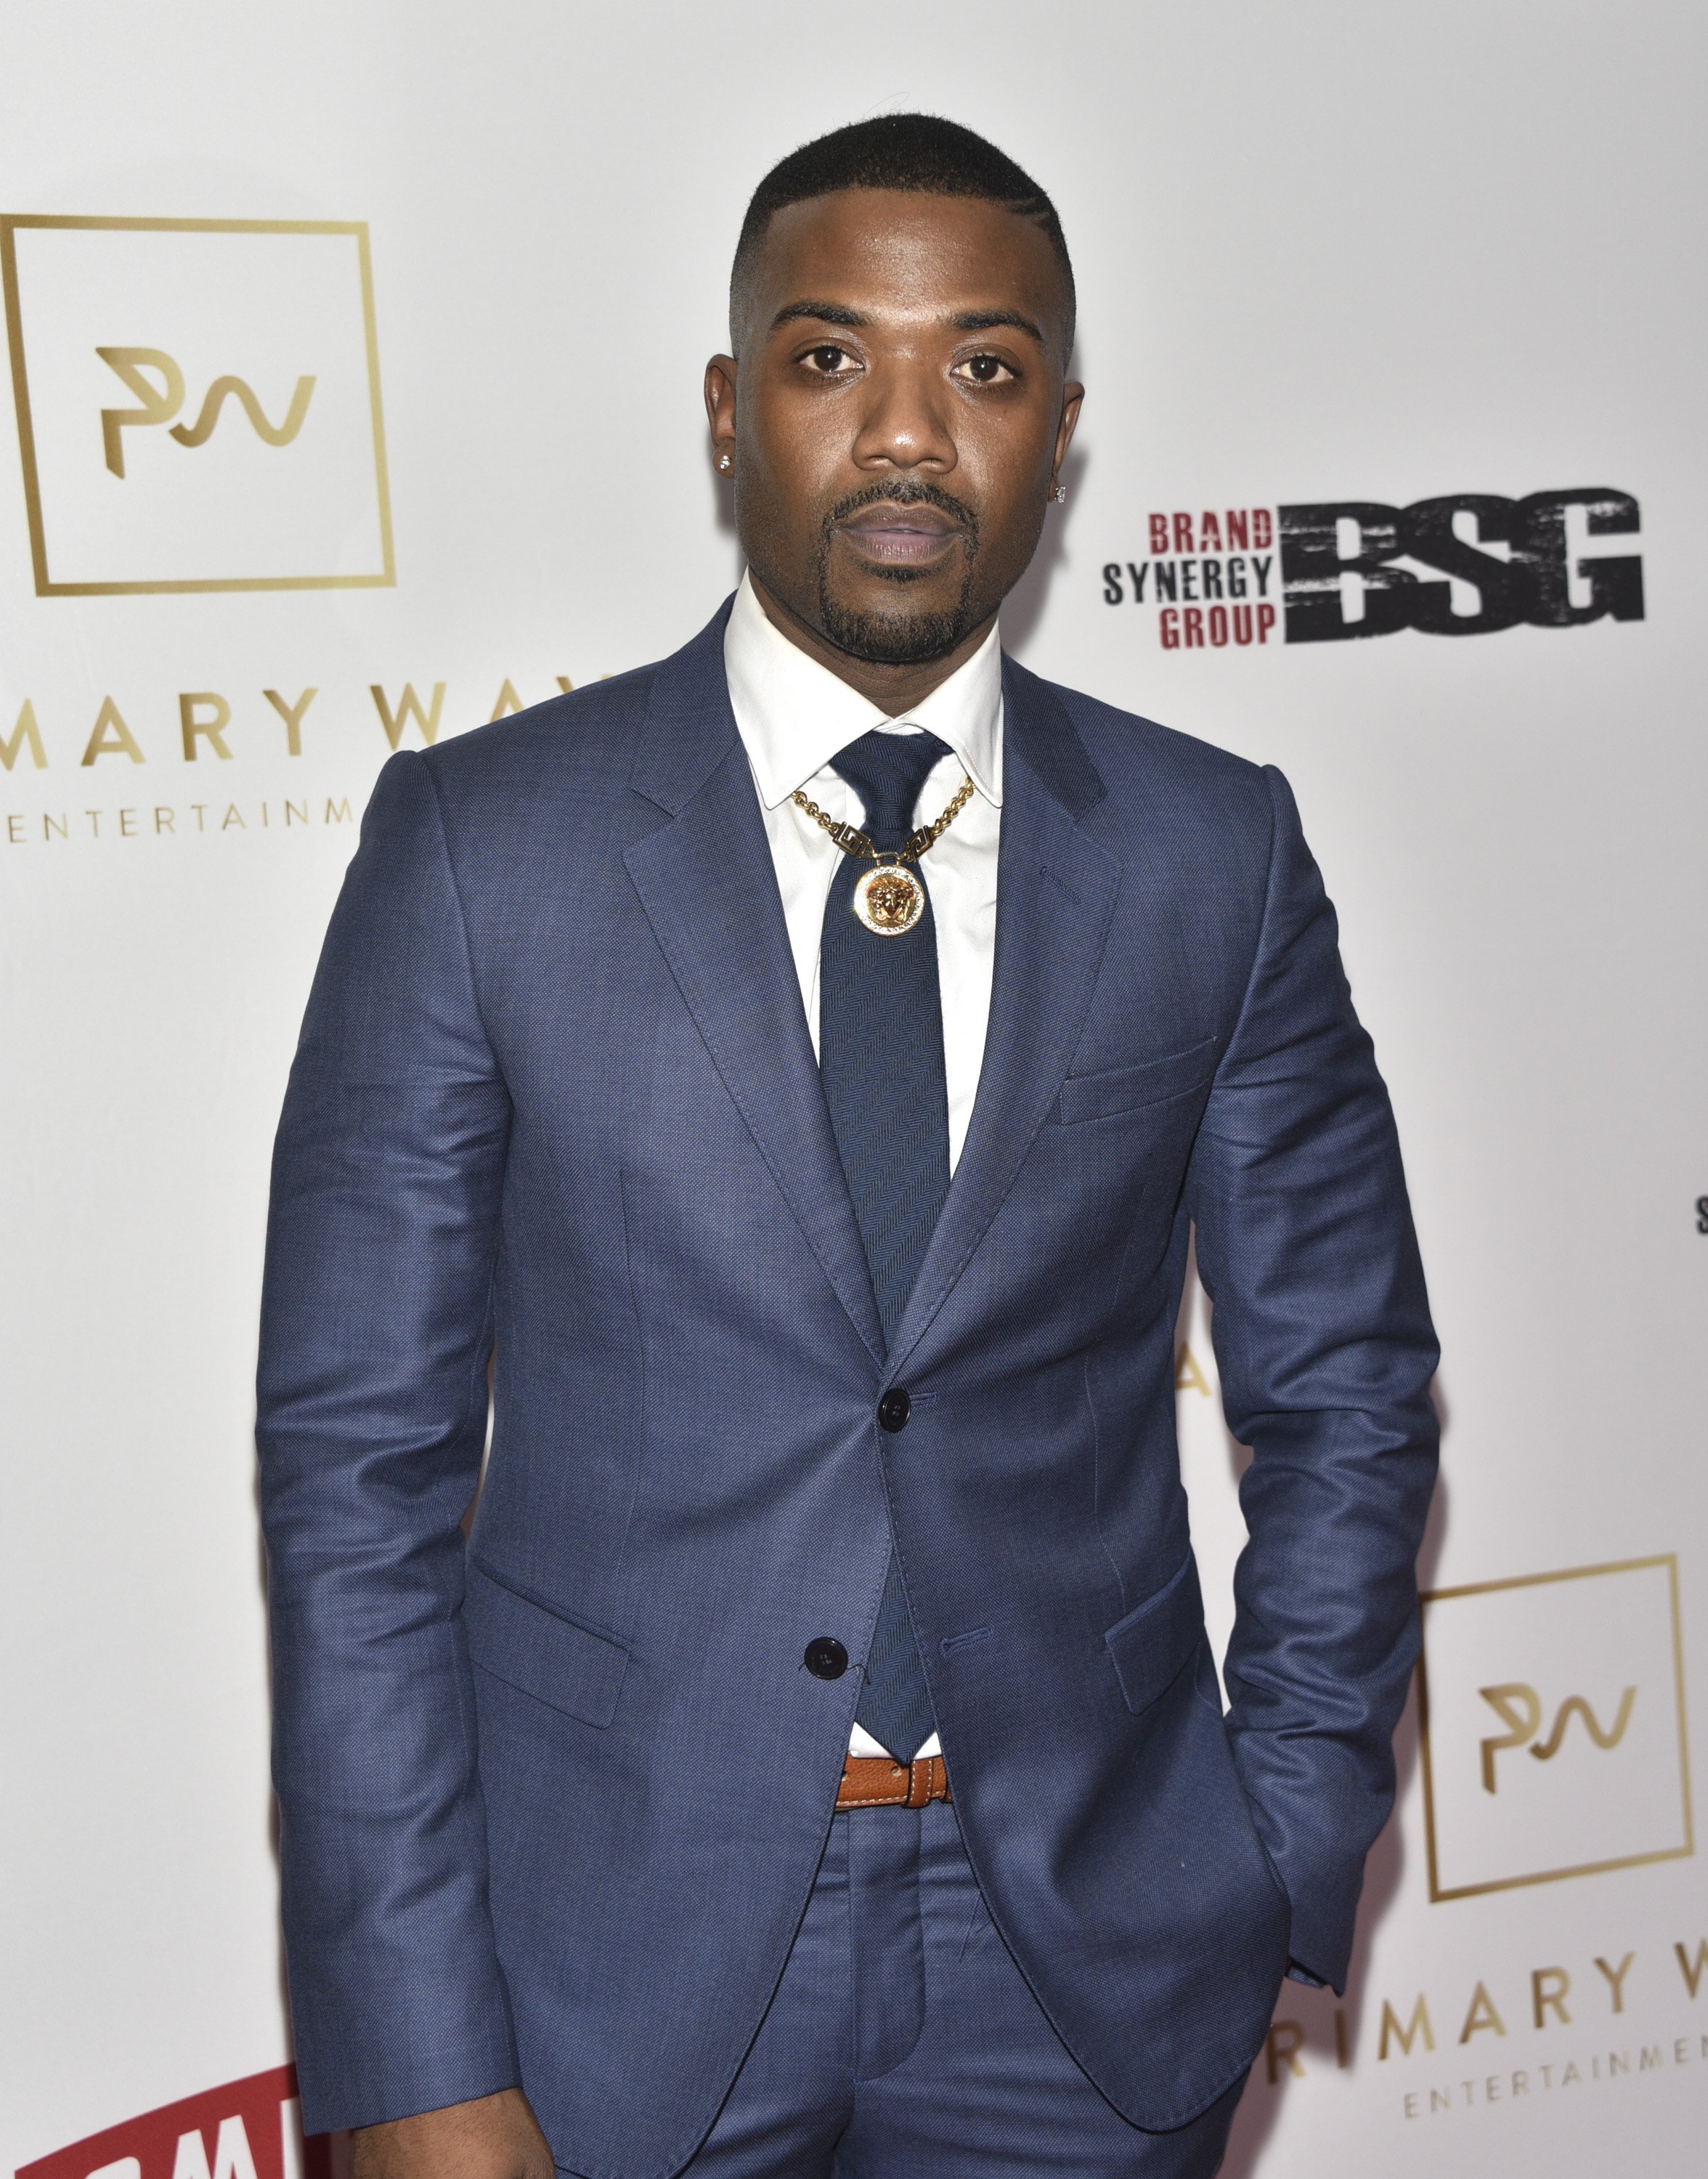 Ray J attends the 11th Annual Pre-Grammy In Partnership With Smirnoff Vodka at The London West Hollywood on February 11, 2017 in West Hollywood, California. | Photo: Getty Images